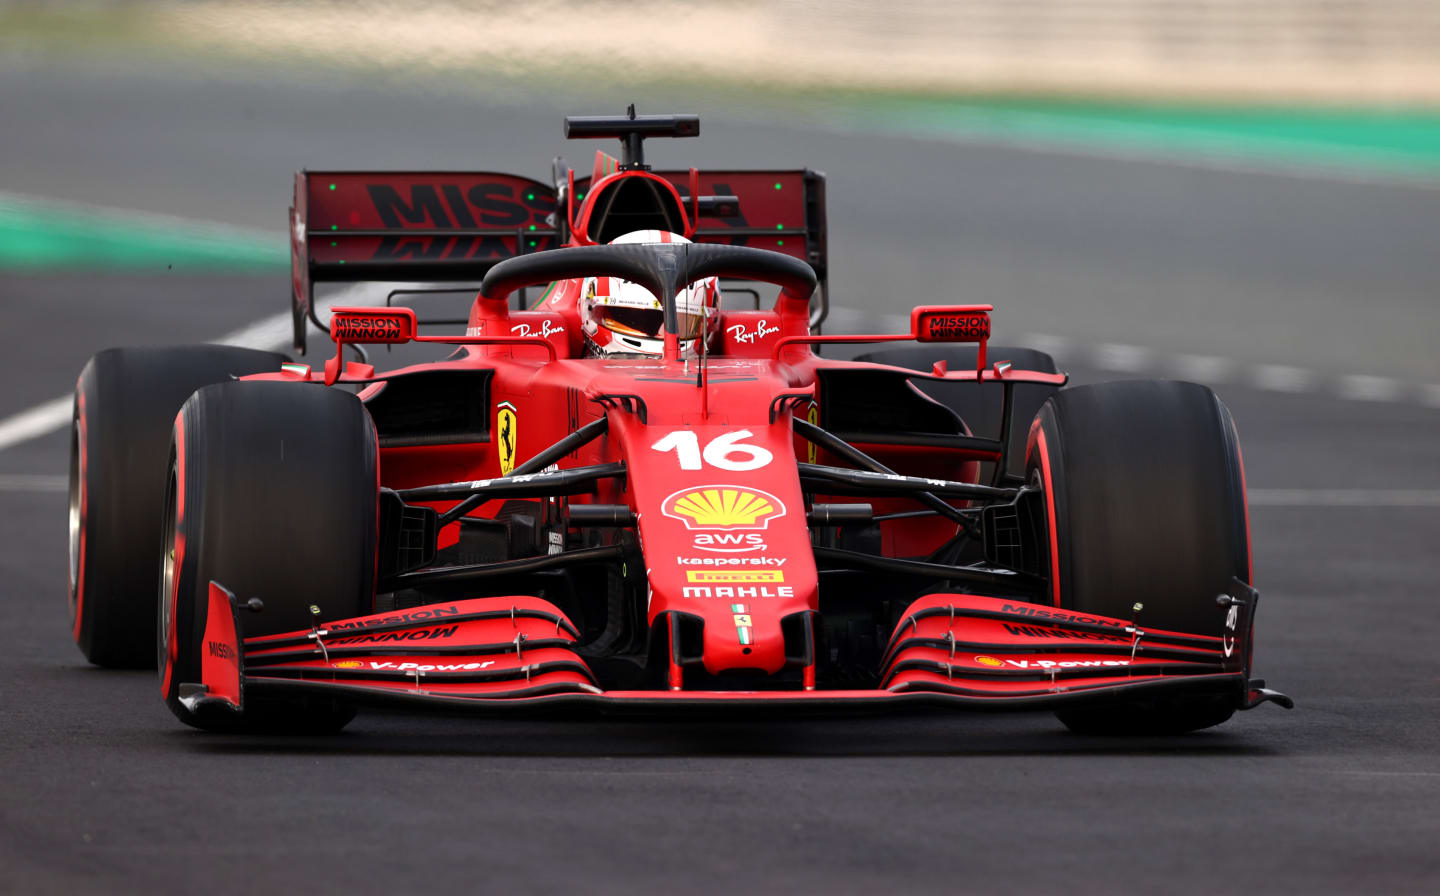 DOHA, QATAR - NOVEMBER 19: Charles Leclerc of Monaco driving the (16) Scuderia Ferrari SF21 during practice ahead of the F1 Grand Prix of Qatar at Losail International Circuit on November 19, 2021 in Doha, Qatar. (Photo by Mark Thompson/Getty Images)